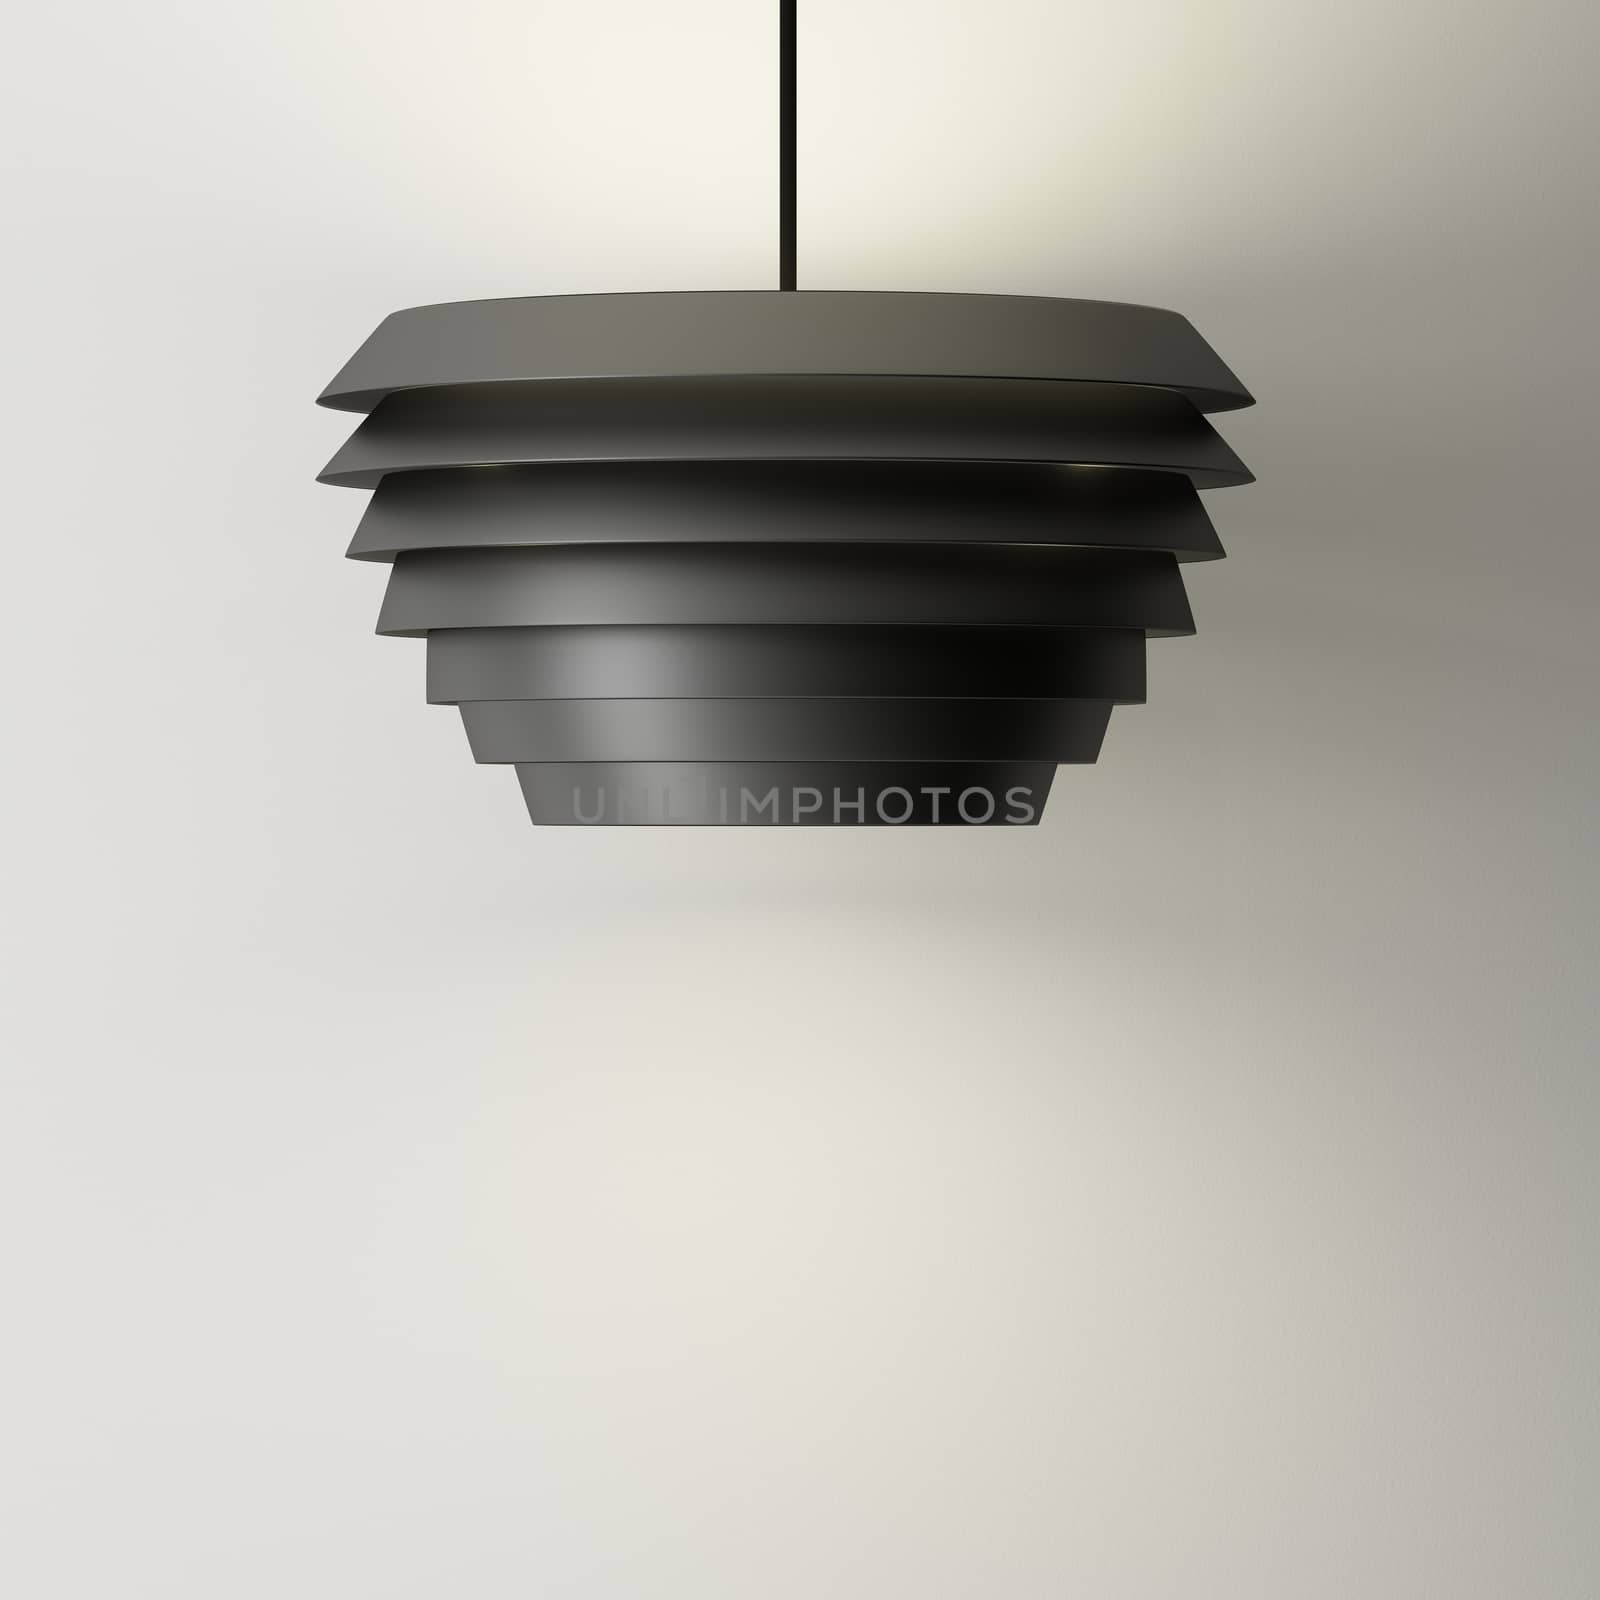 Black Lamp of decorated design and wall background by sayhmog